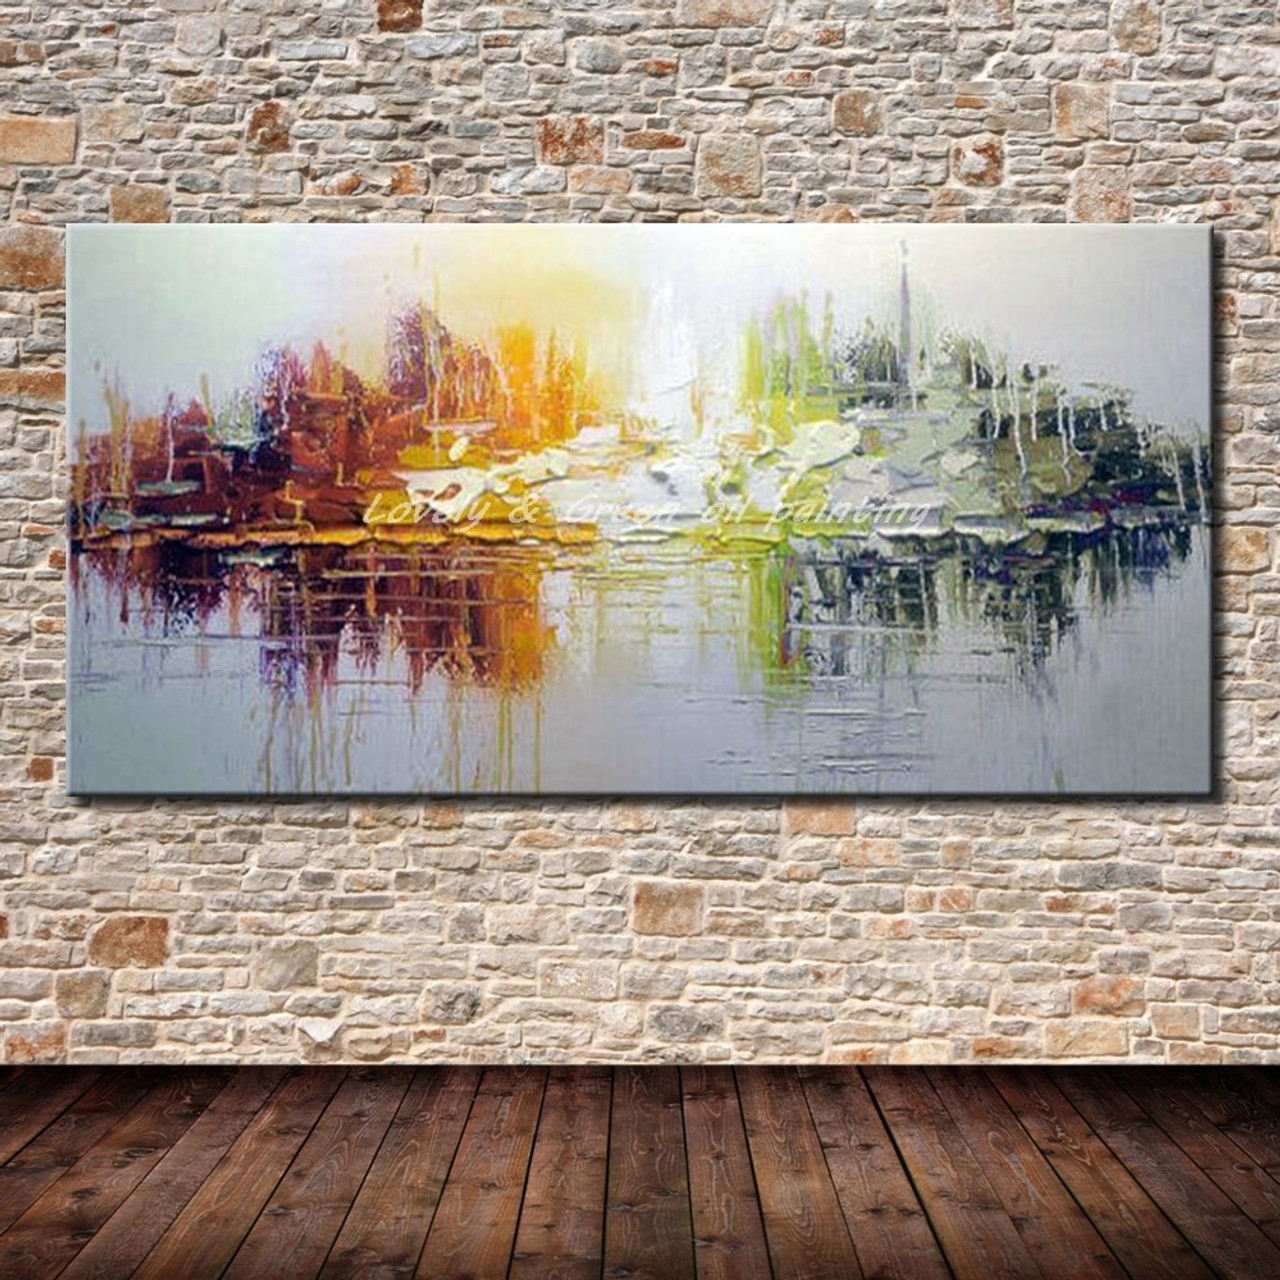 Hand Painted Canvas Oil Paintings Modern Abstract Oil Painting On Canvas Wall Art Pictures For Living Room Hotal Decor Best Gift Onshopdeals Com